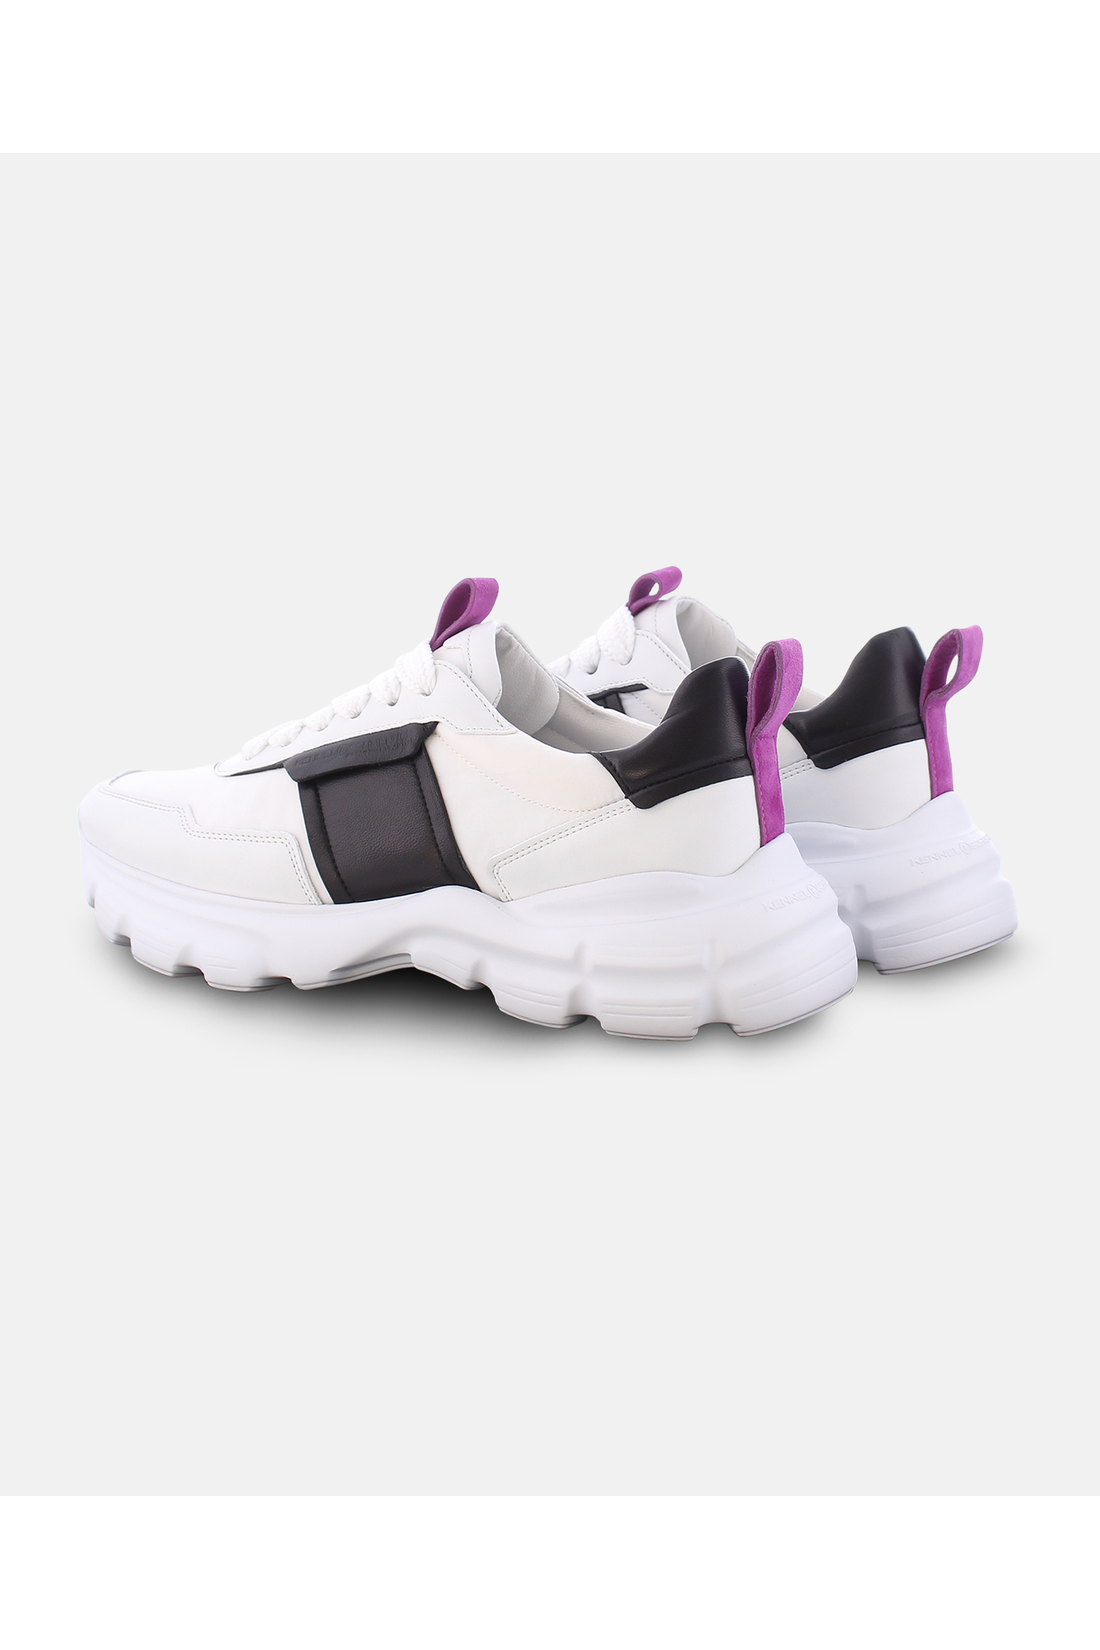 Kennel-Schmenger-OUTLET-SALE-FEVER-Sneakers-ARCHIVE-COLLECTION-2.png